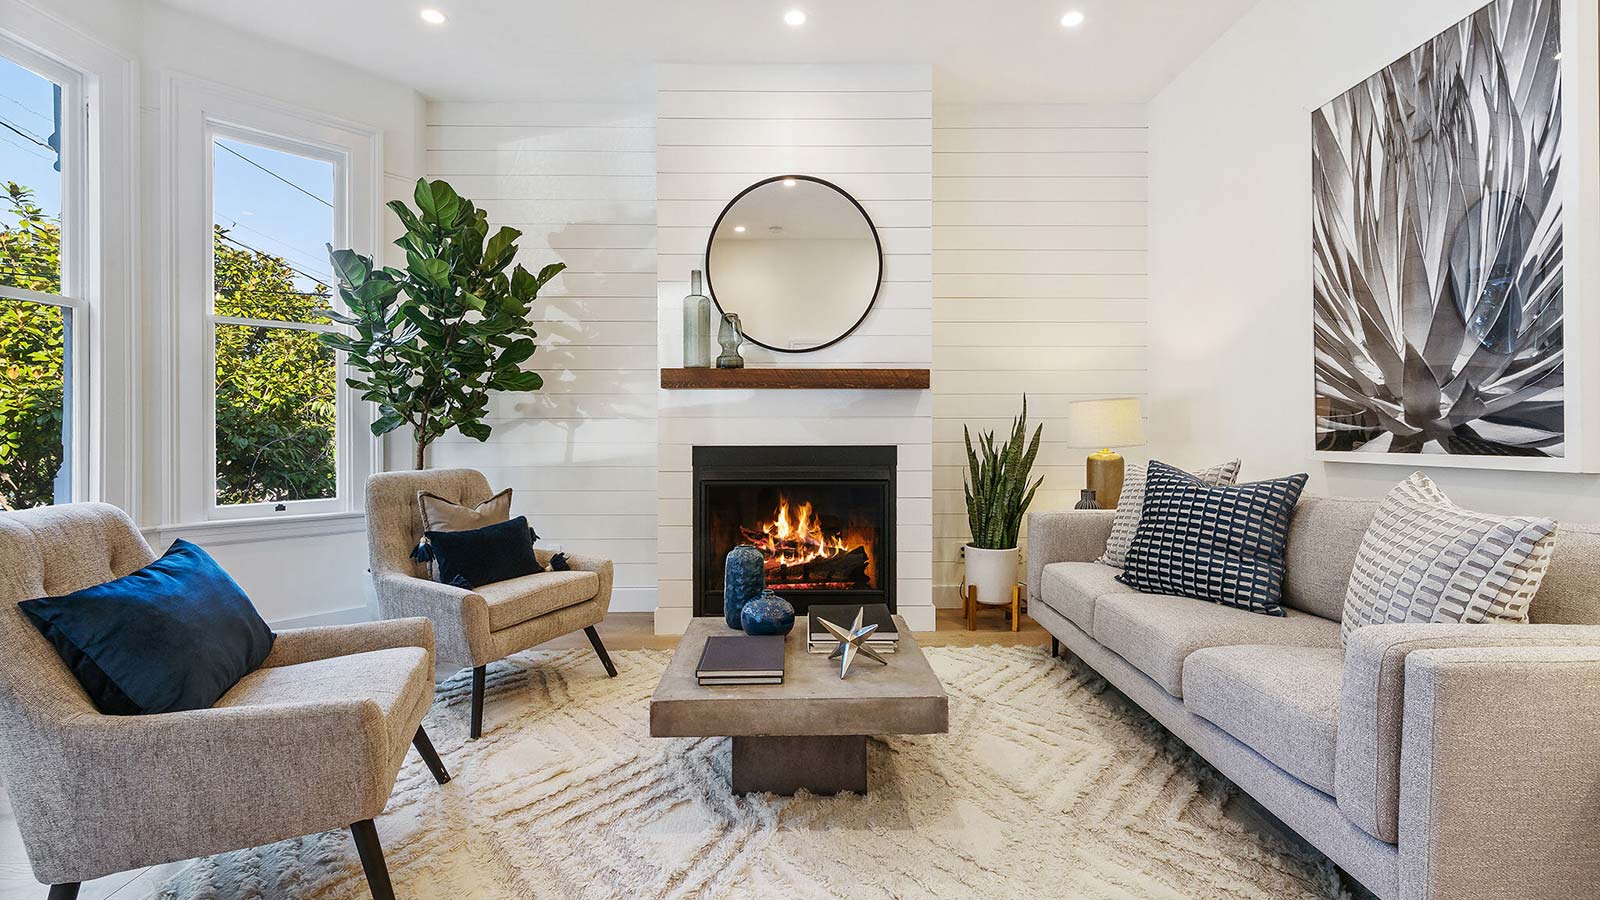 15 Shiplap Fireplace Ideas For Any Budget Or Style - 10 Stunning Homes